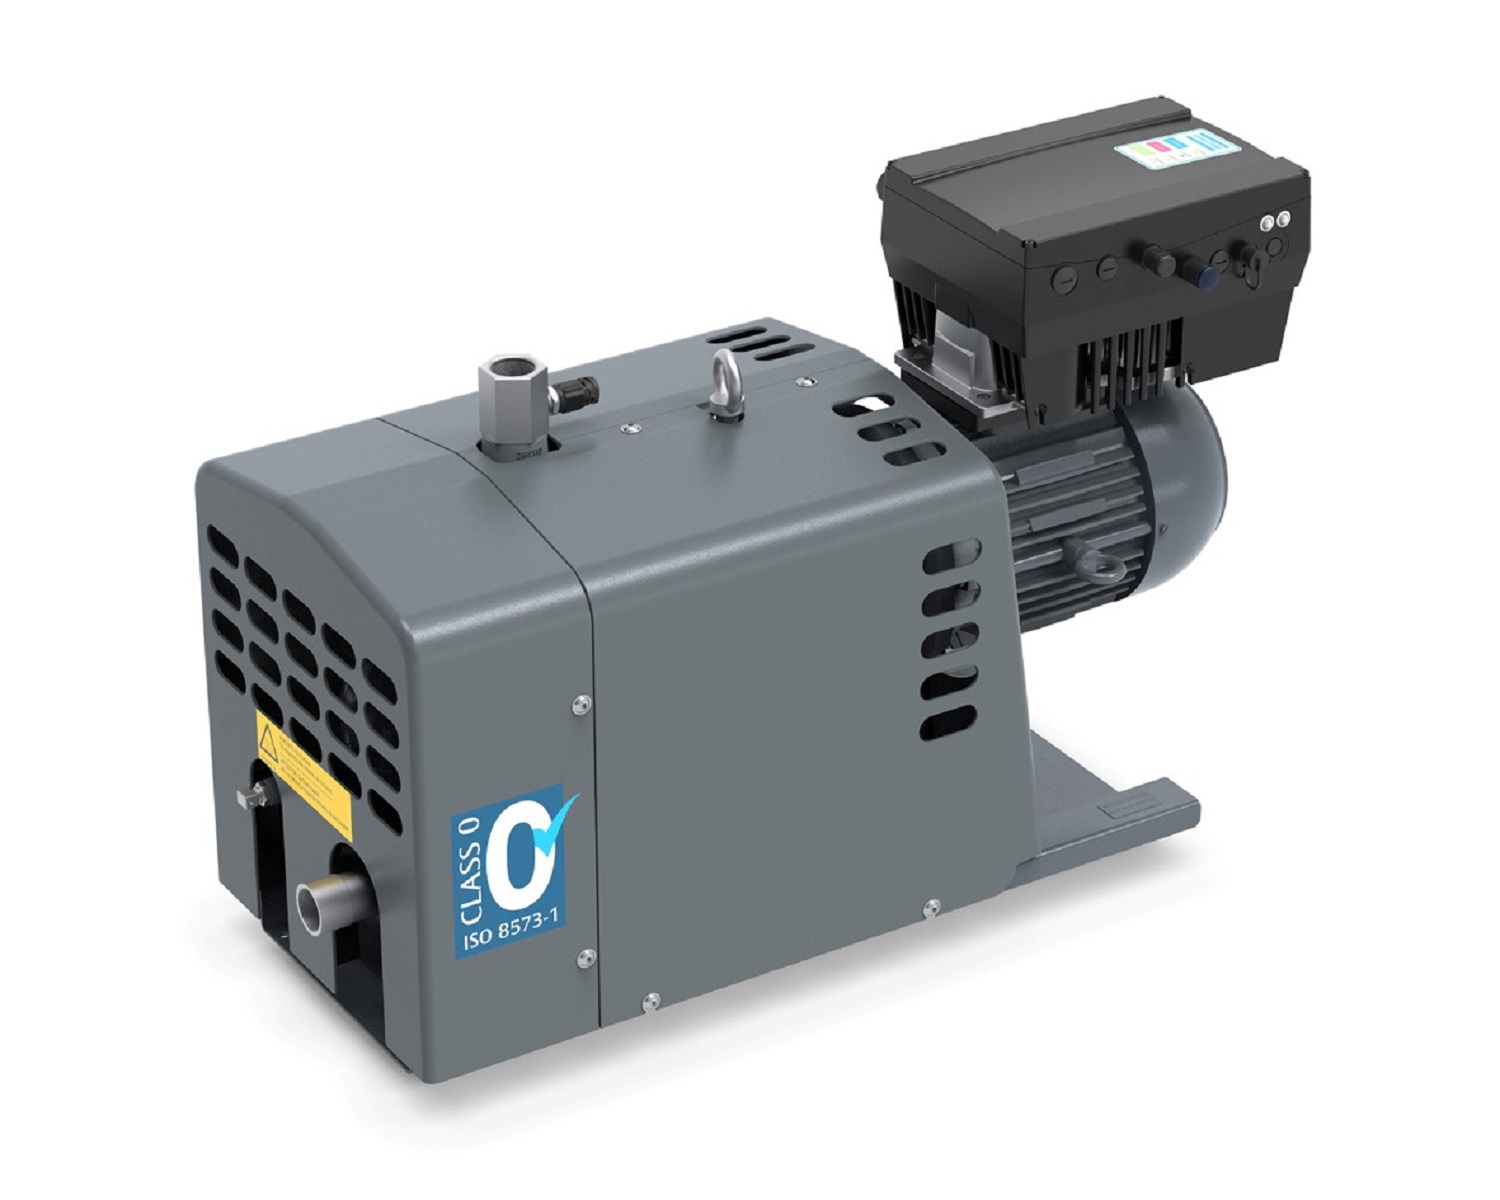 The Atlas Copco DZS vacuum pump is one of the products supported by the new app.